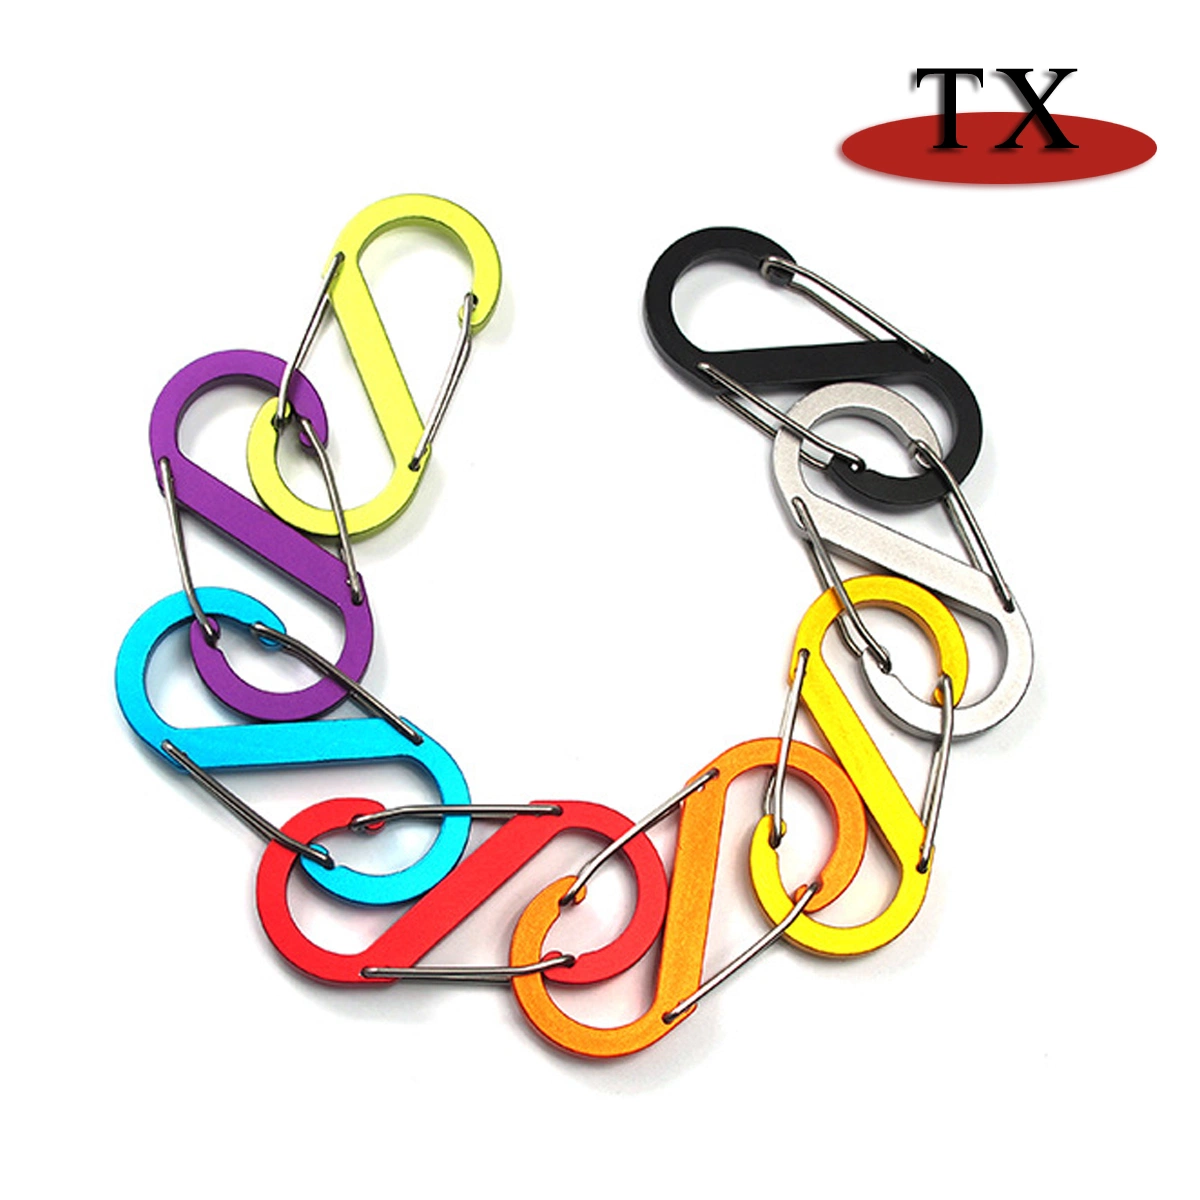 High quality/High cost performance Metal Keychain Key Ring and Backpacks S Shape Carabiner